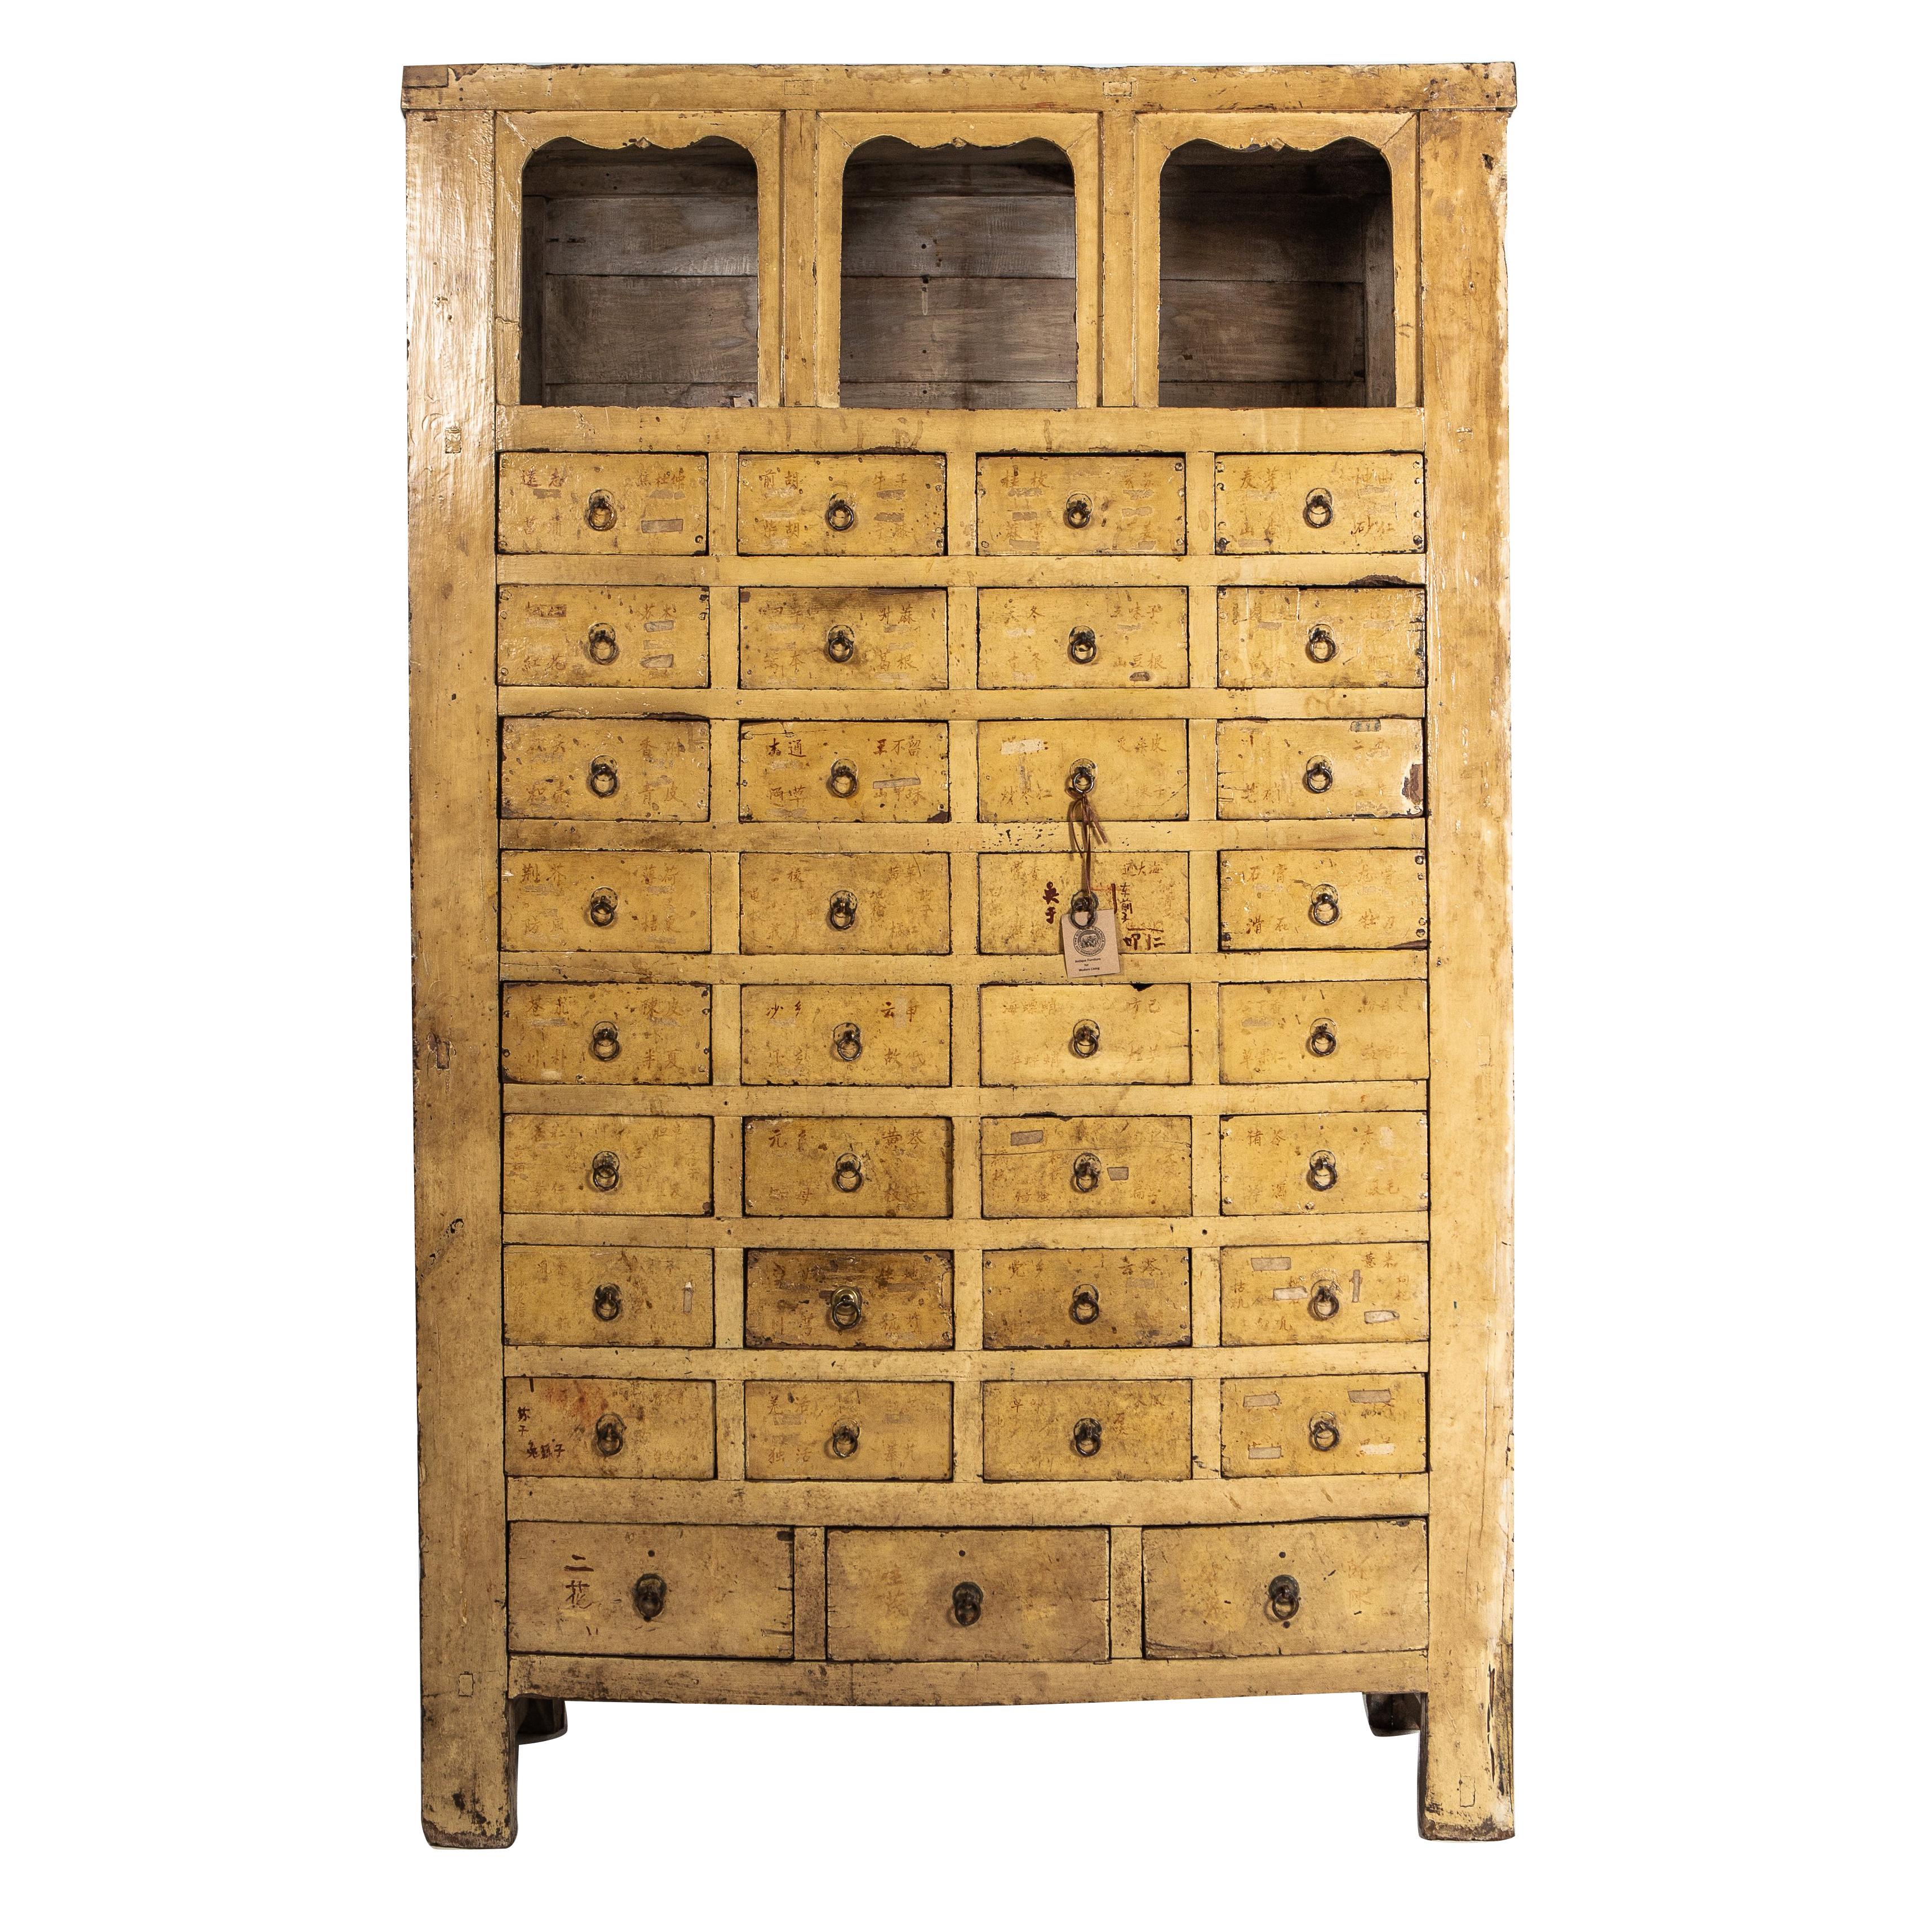 Qing Dynasty Medicine Cabinet with 35 Drawers